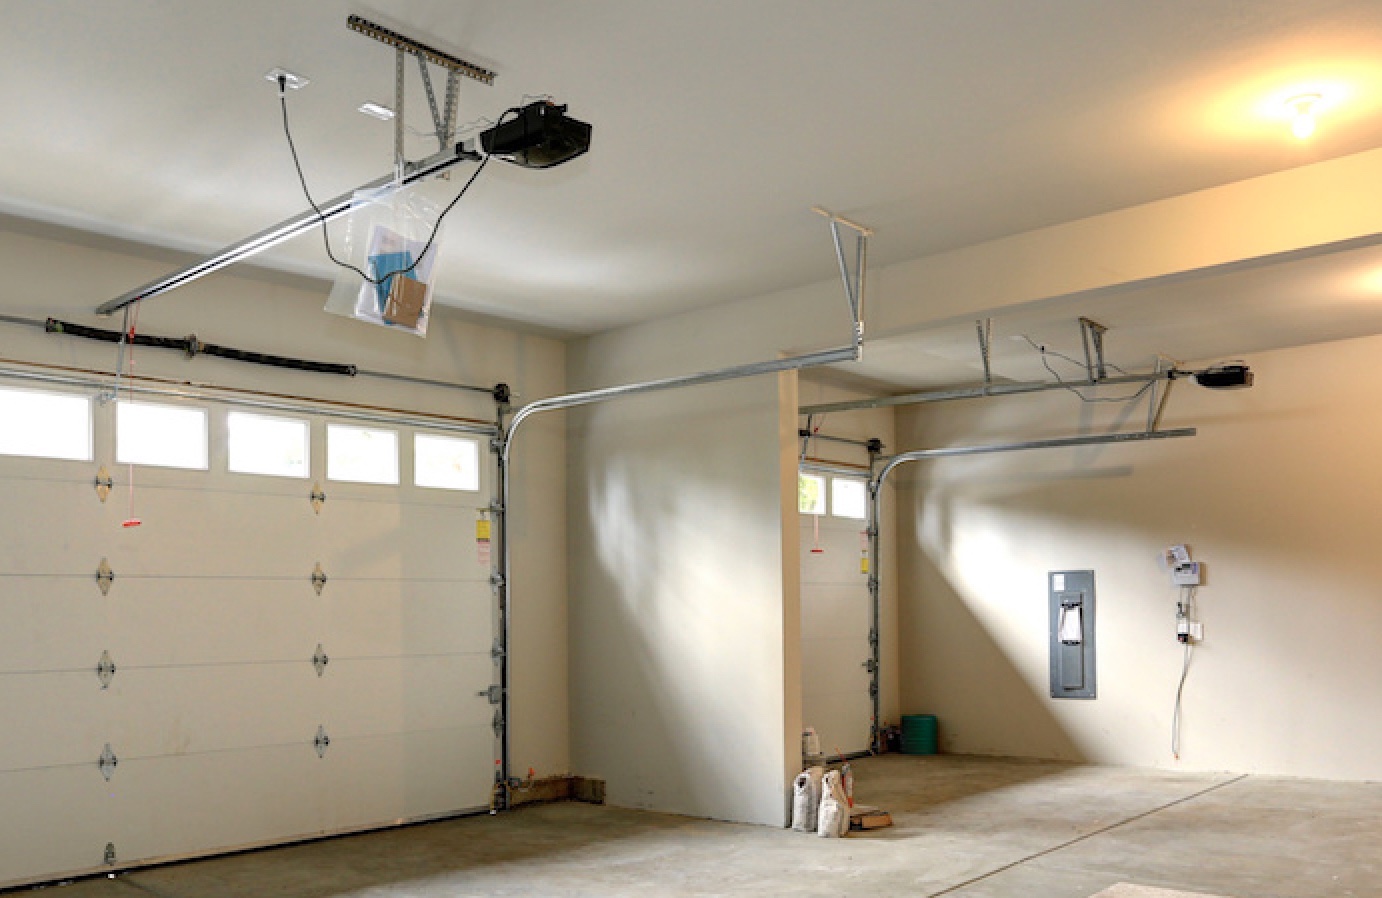 Minimum Ceiling Height For A Garage